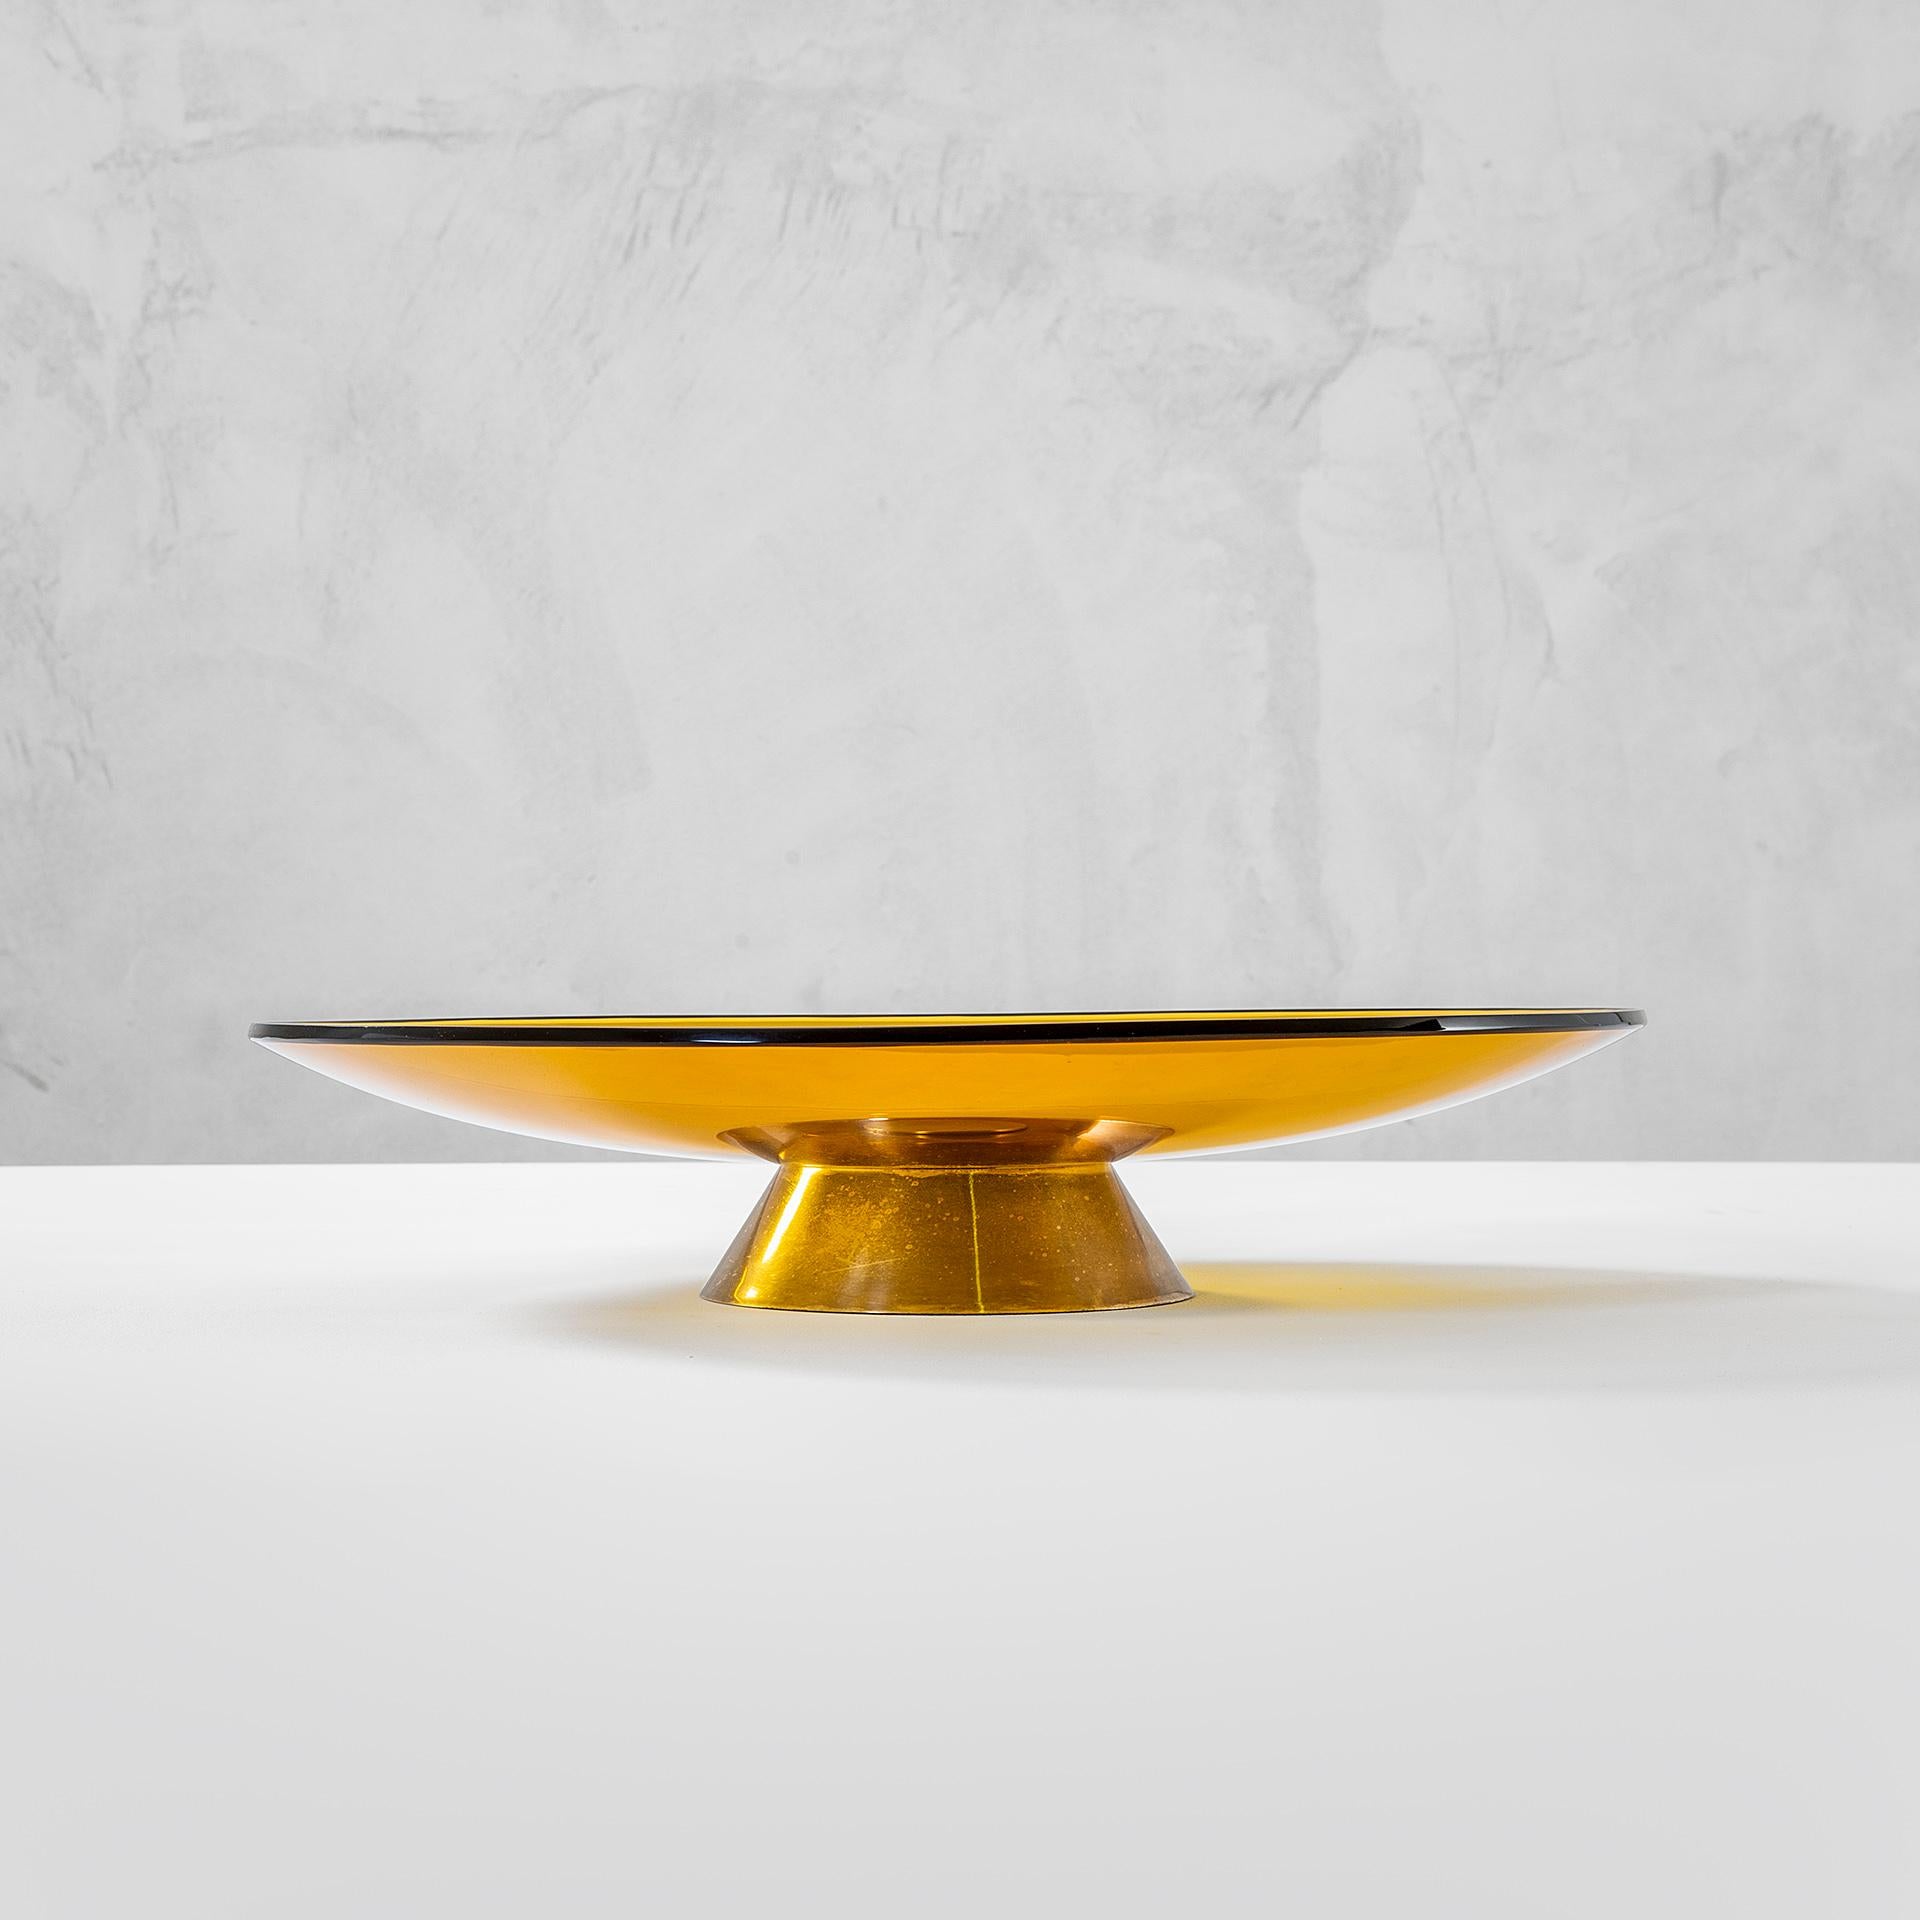 Very beautiful Centerpiece designed by Max Ingrand for Fontana Arte, model 2039, designed in '60s. The Bowl has a base in silvered metal and then it is entirely in colored glass (orange). This centerpiece is perfect to be set in the middle of a